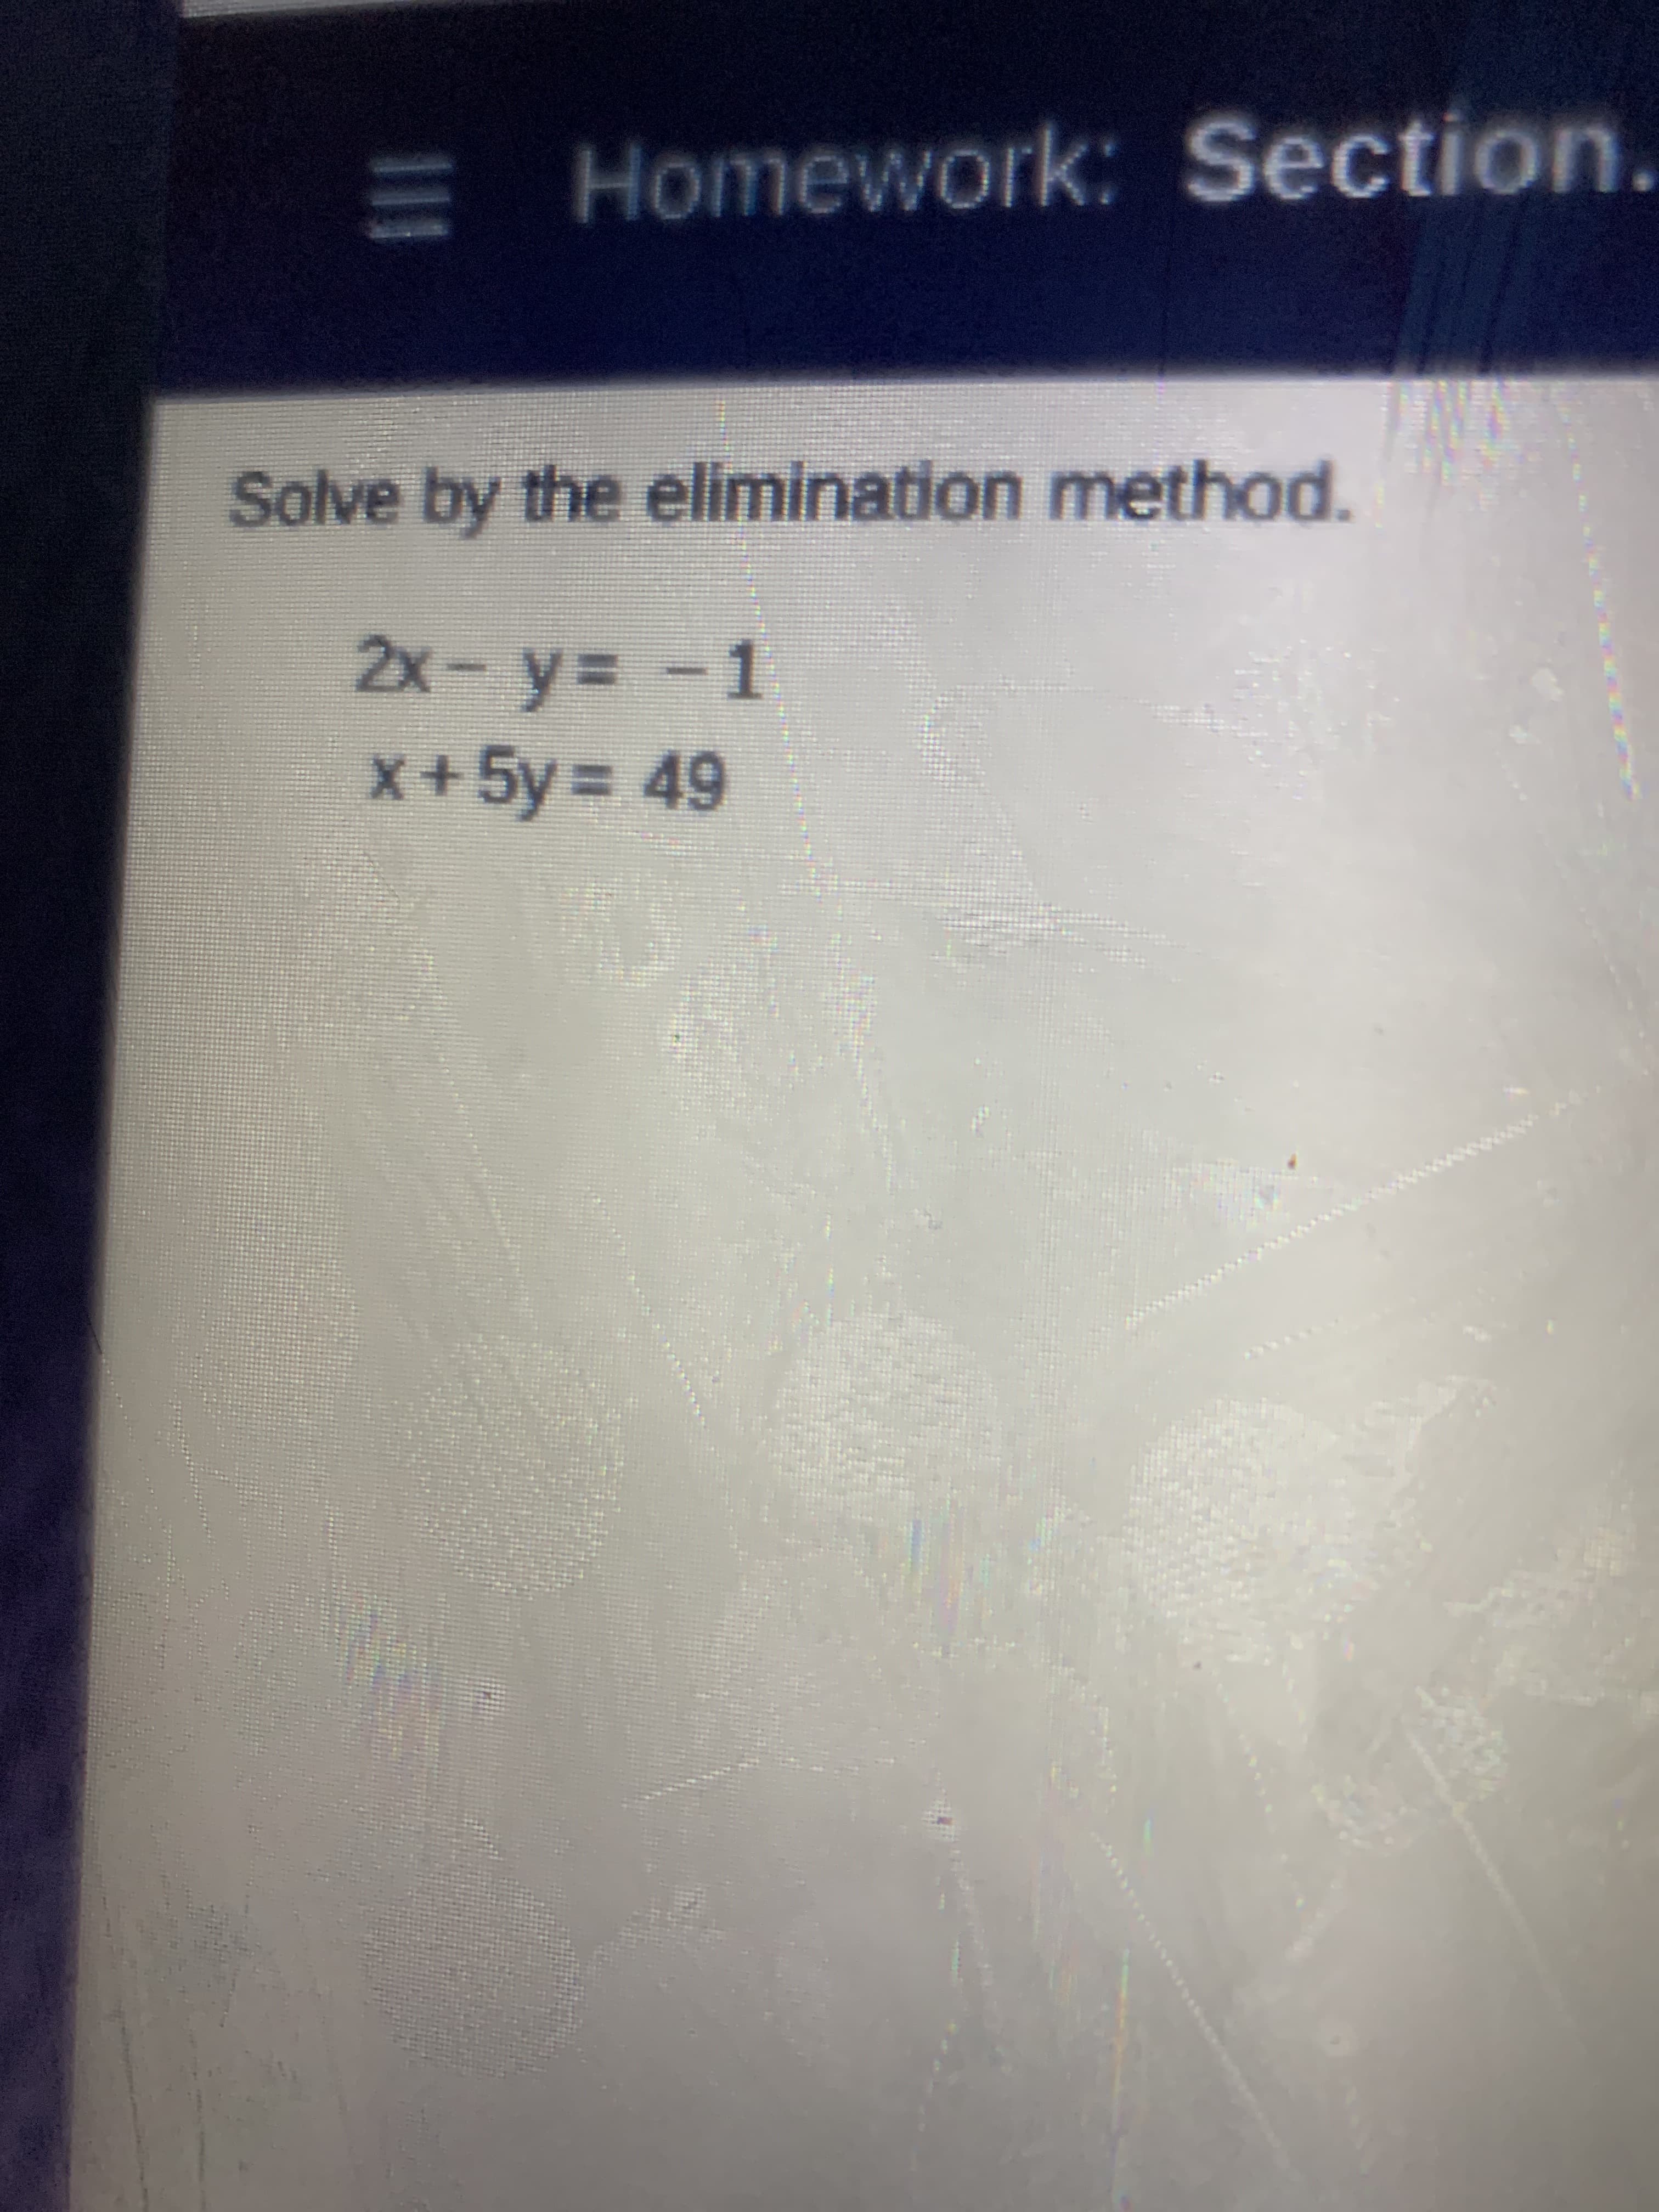 Solve by the elimination method.
2x-y= -1
+5y = 49
